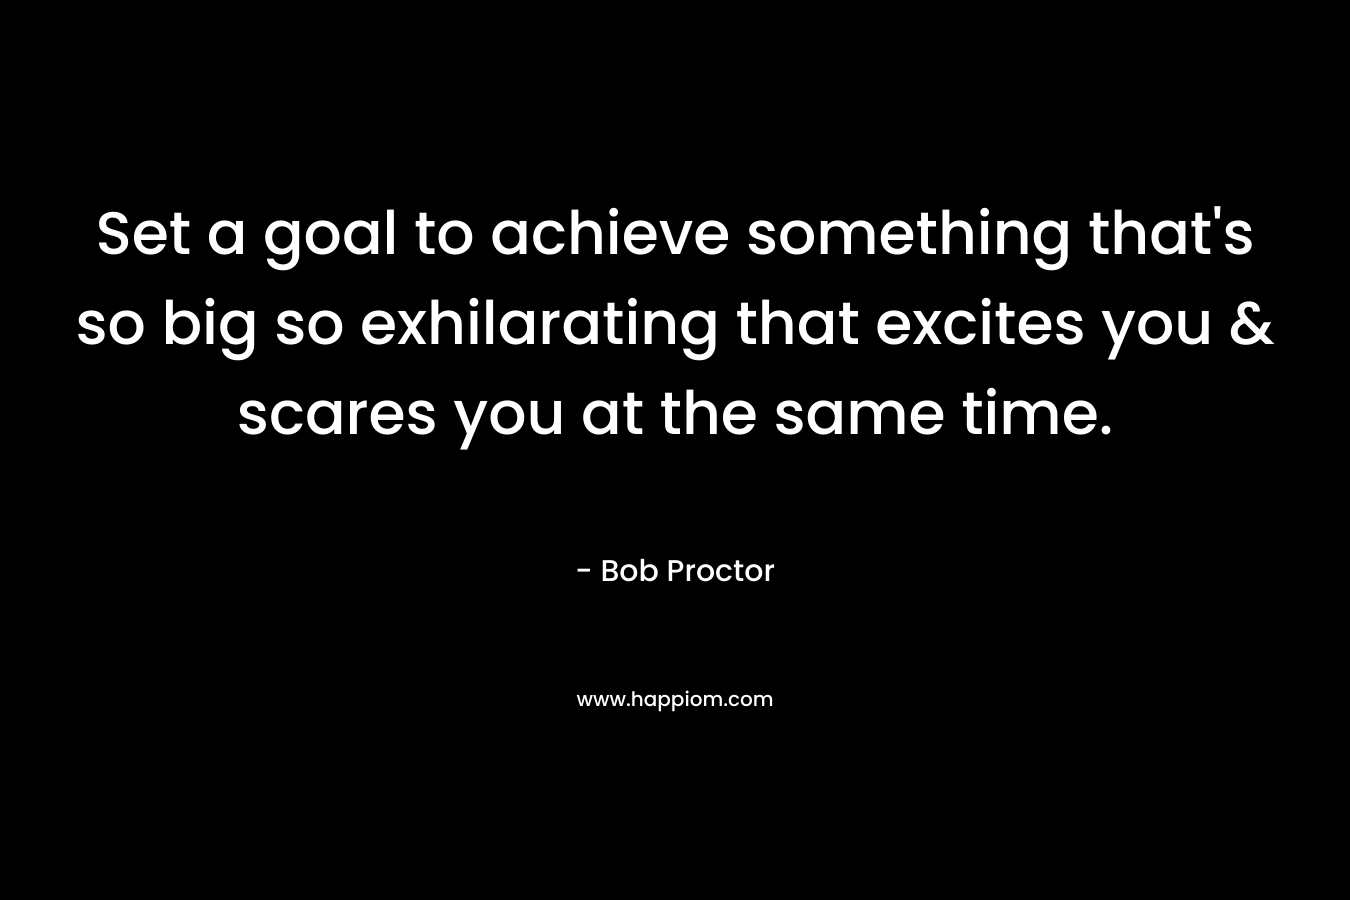 Set a goal to achieve something that’s so big so exhilarating that excites you & scares you at the same time. – Bob Proctor